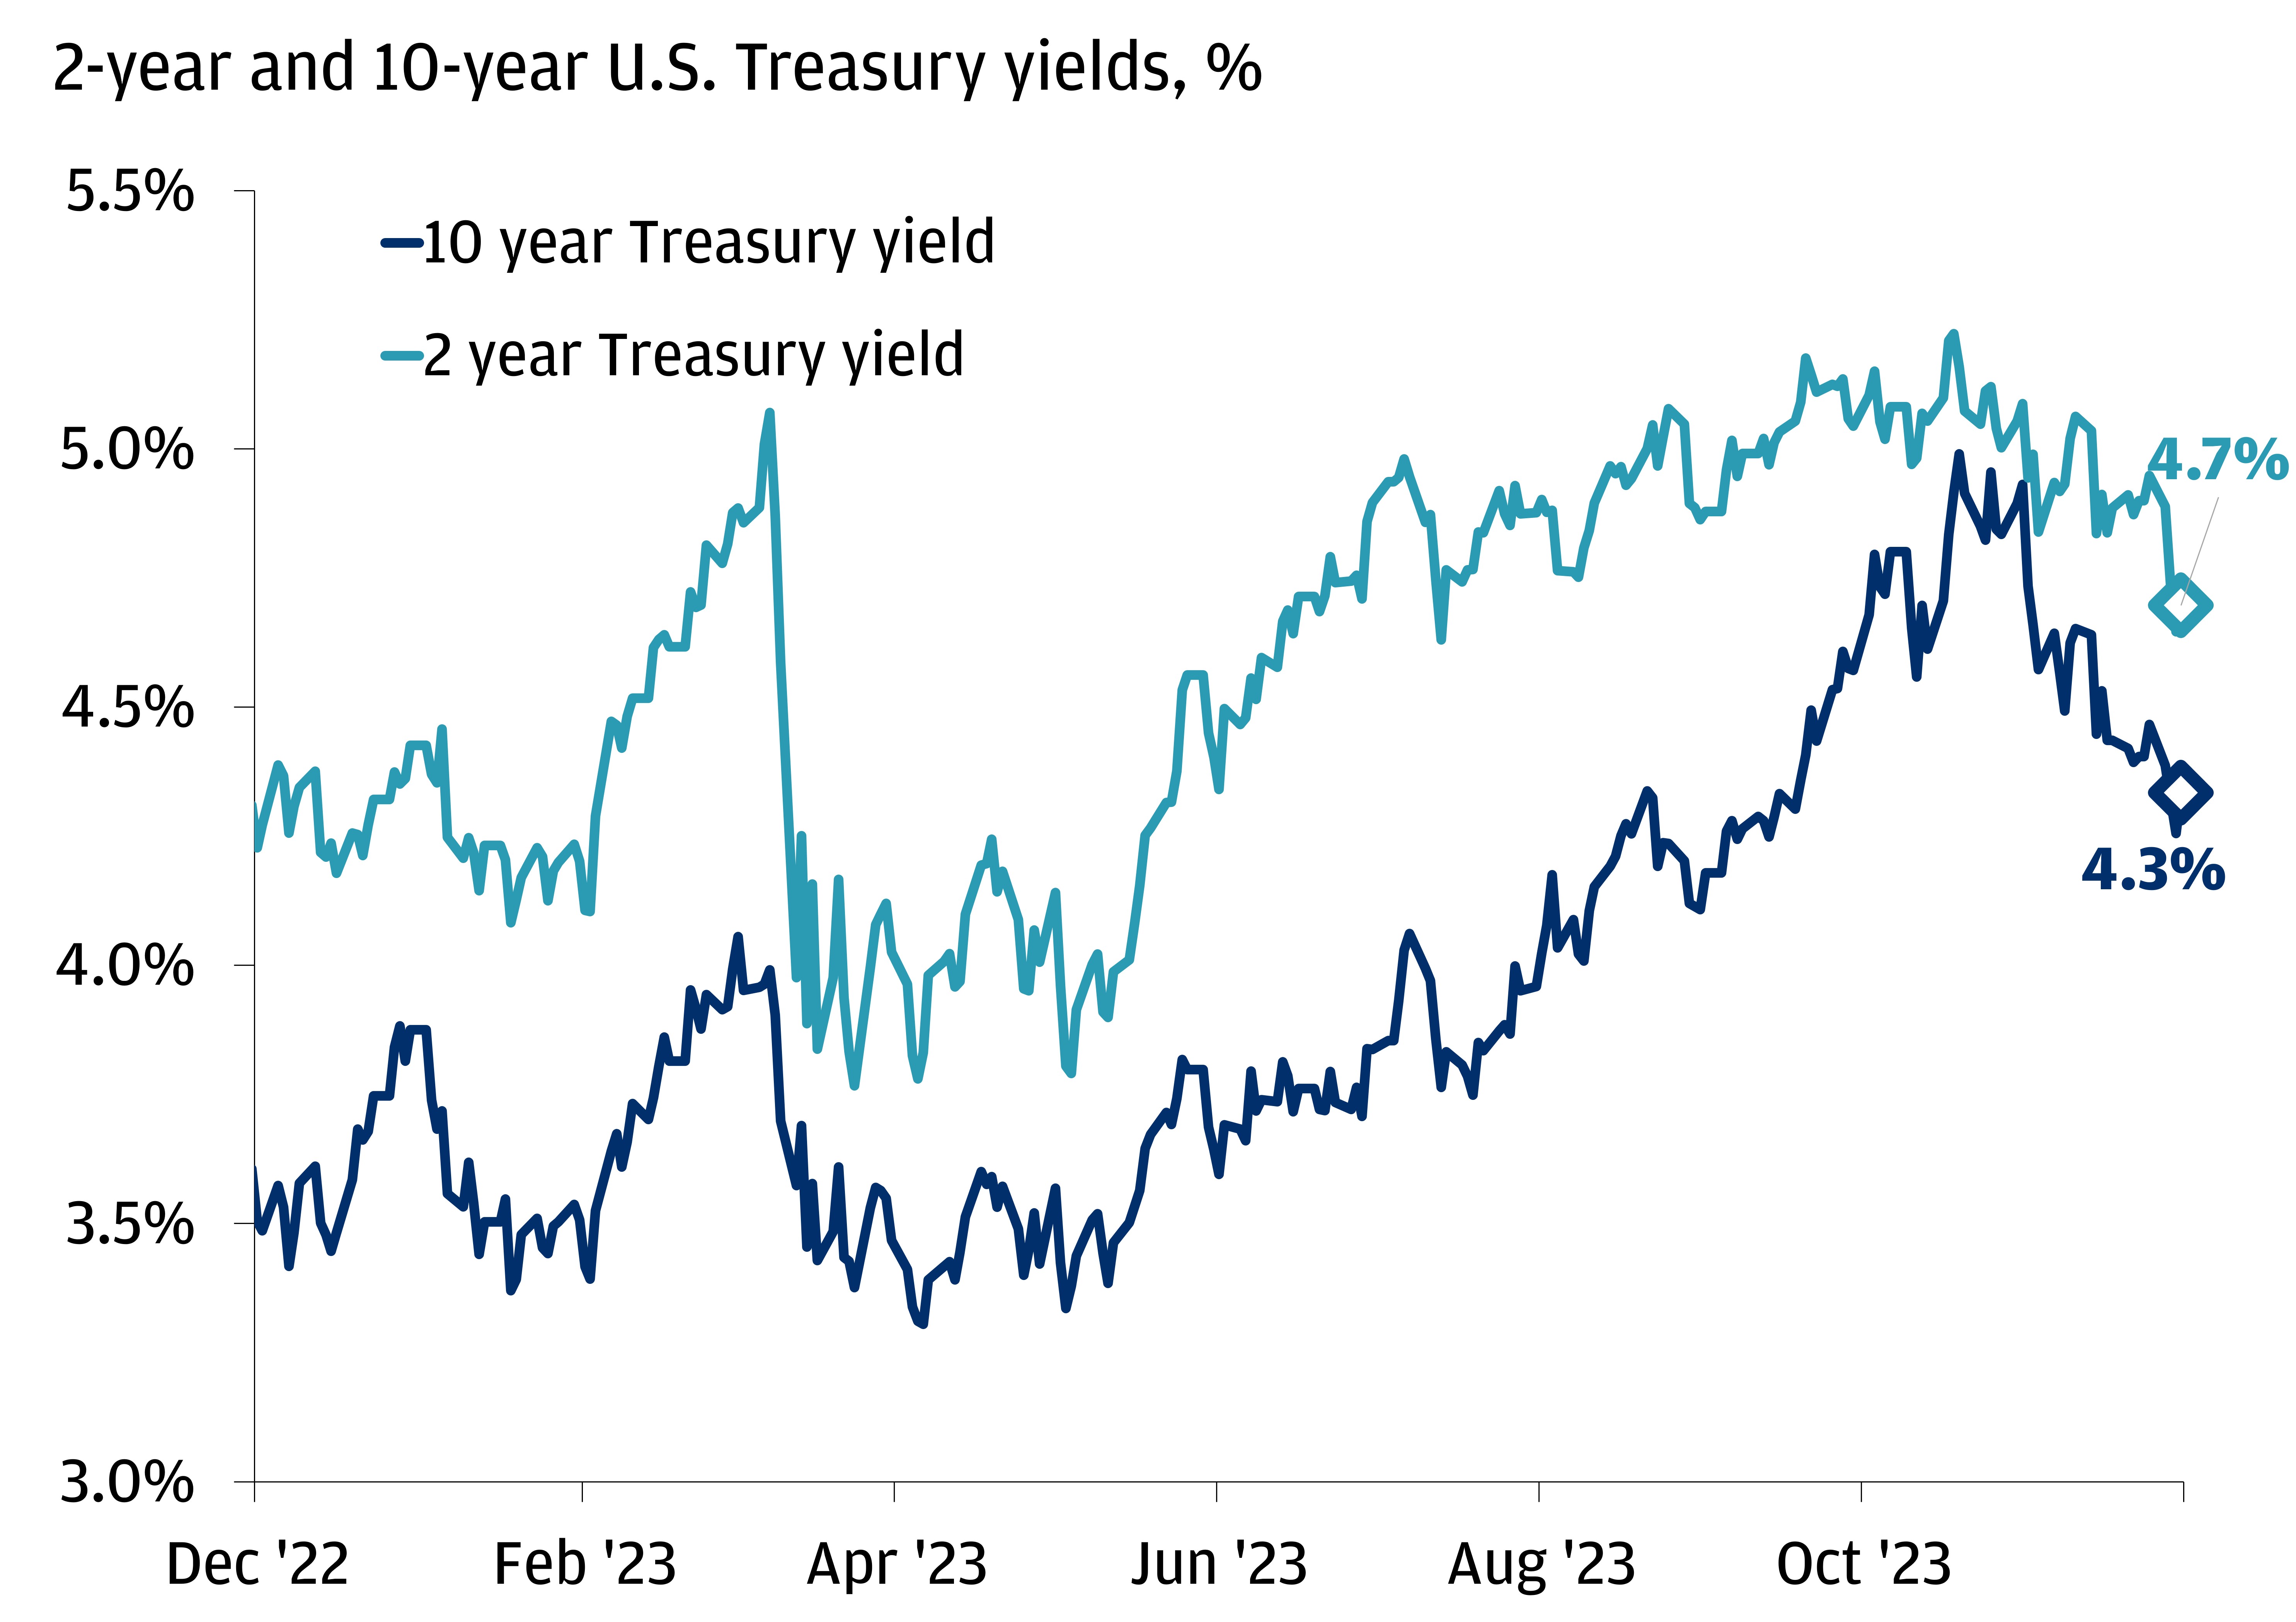 The chart shows 2- and 10-year U.S. Treasury yields since December 2022.